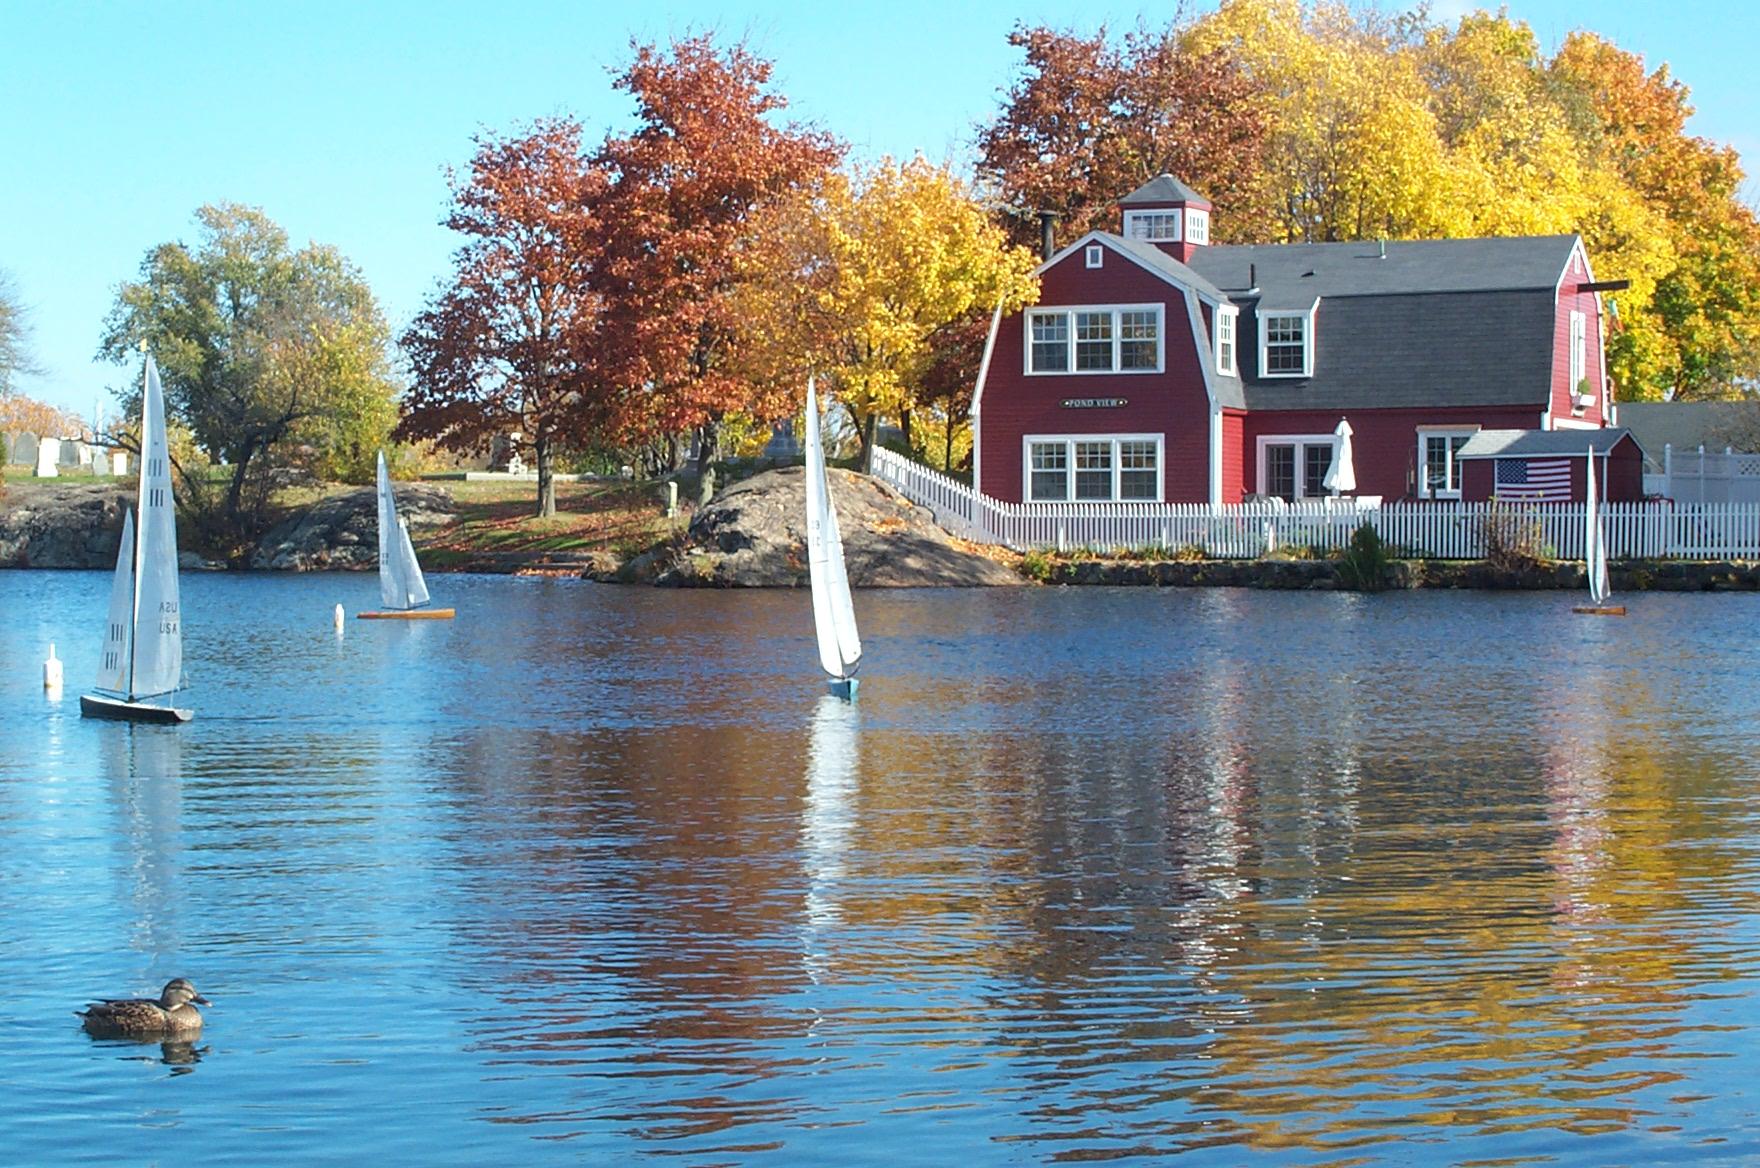 Miniature Sailboats (user submitted)